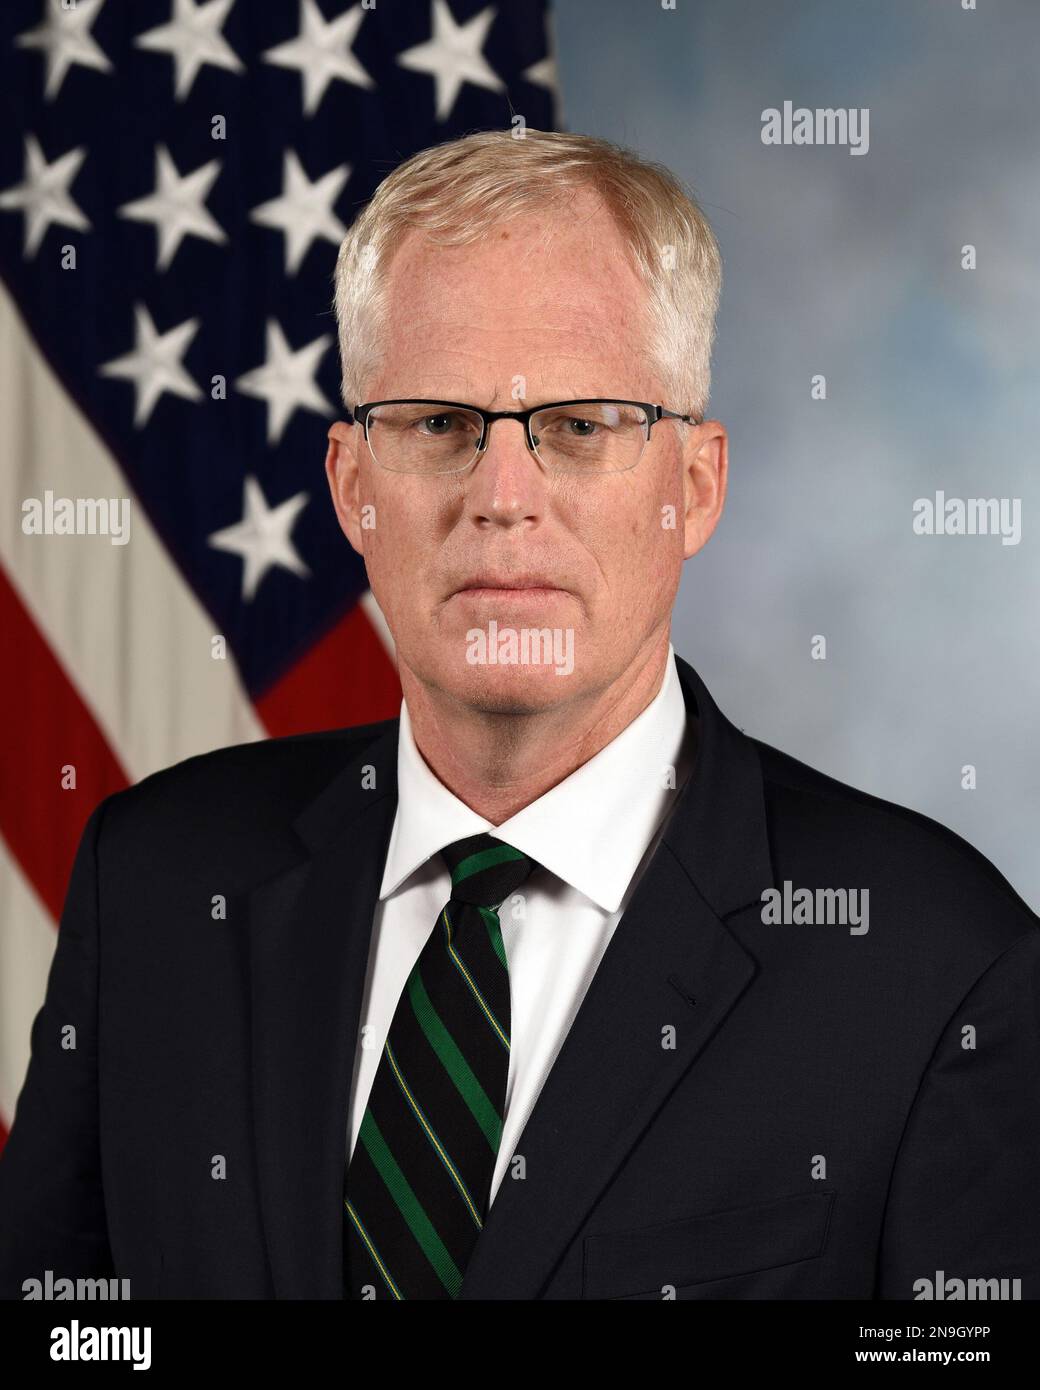 Christopher Charles Miller, American retired United States Army Special Forces colonel who served as acting United States secretary of defense from November 9, 2020, to January 20, 2021. Stock Photo